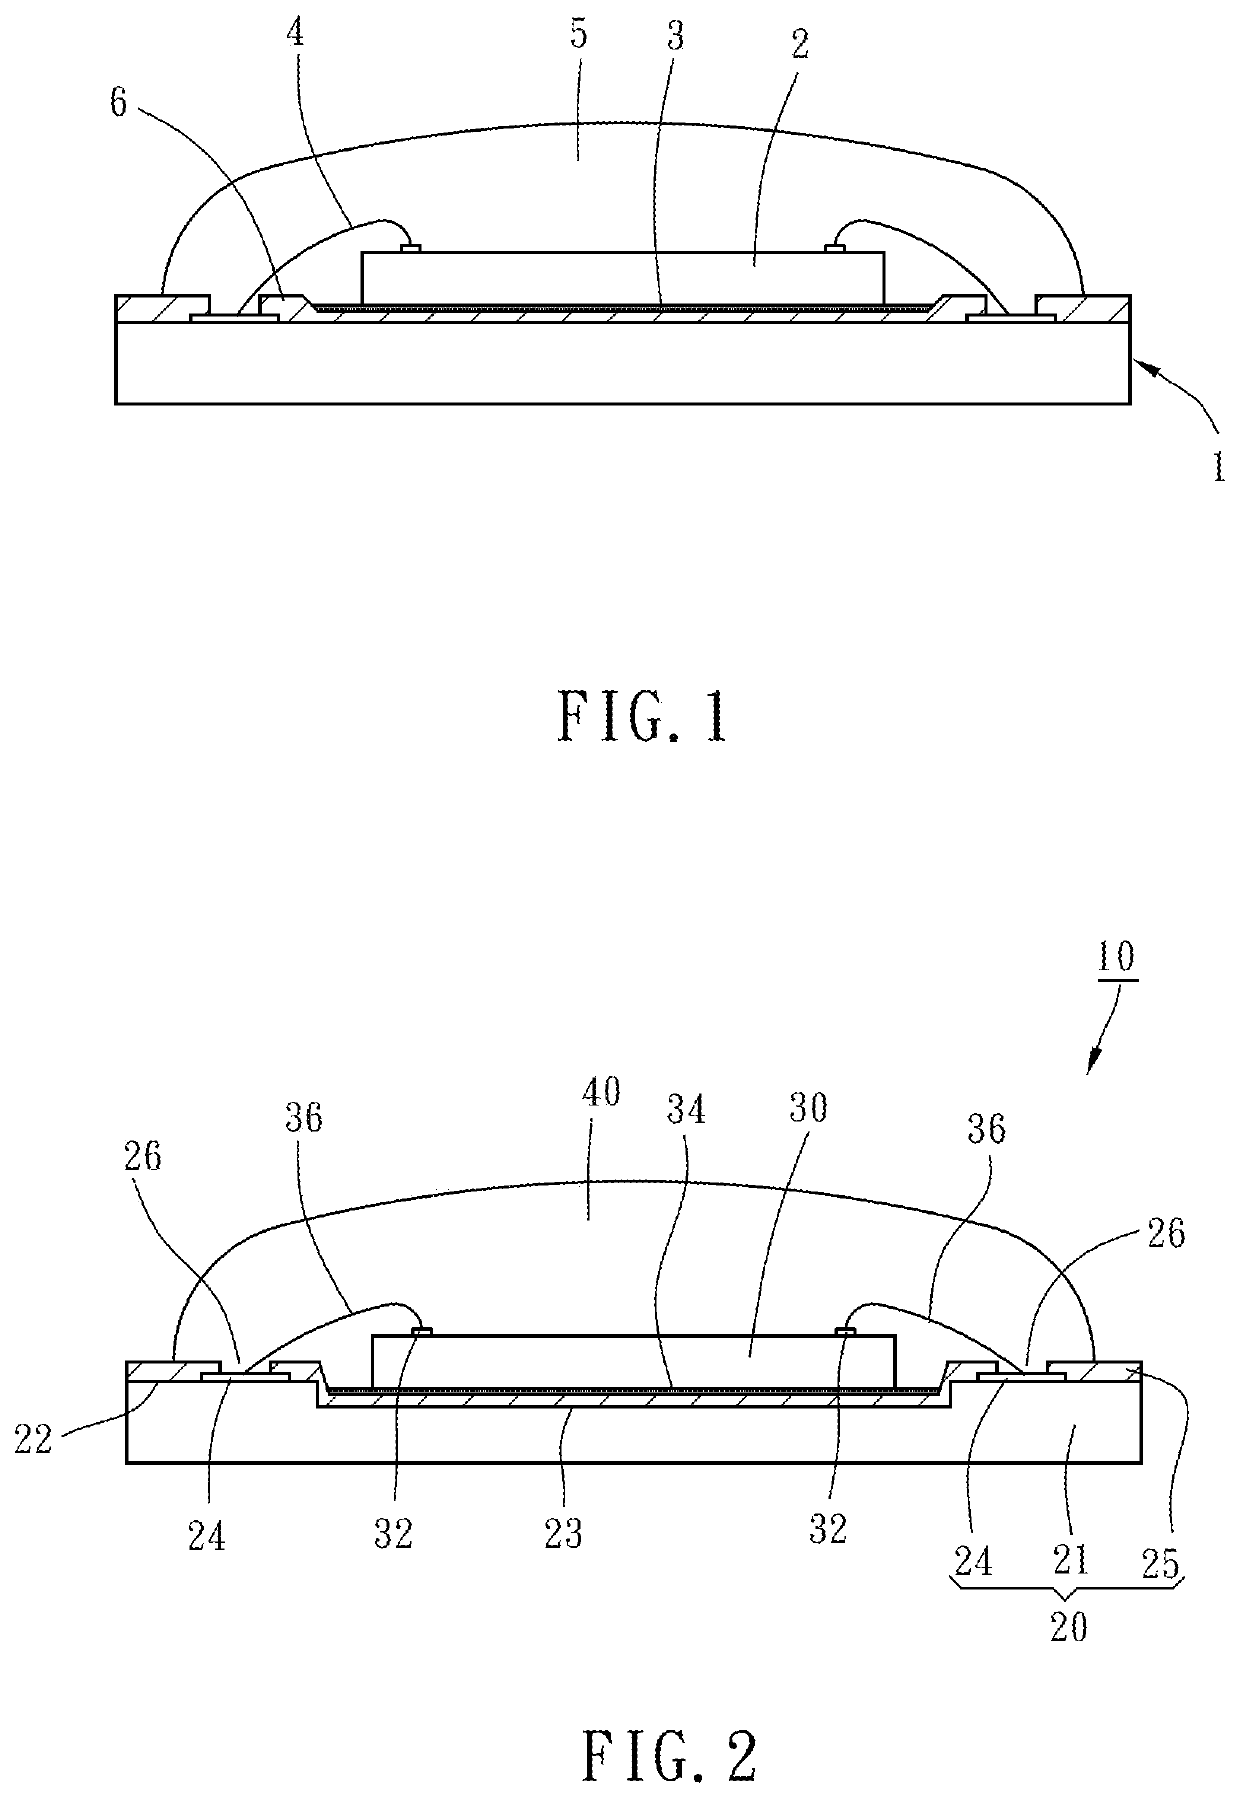 Chip package structure having function of preventing adhesive from overflowing